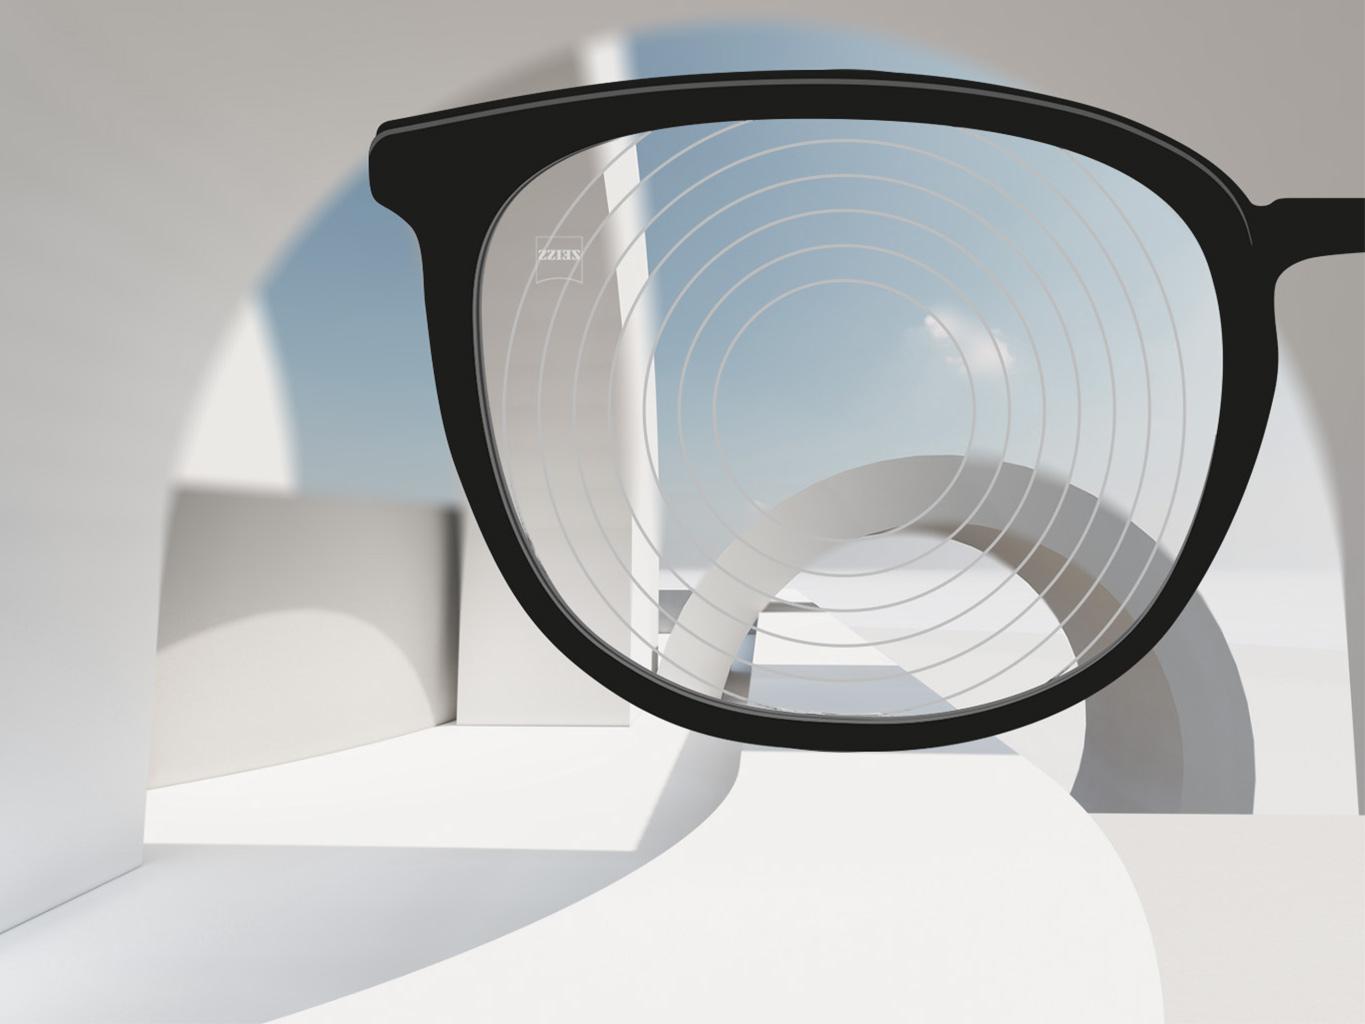 A close-up image of Myopia Management lenses by ZEISS, with black eyeglass frames and concentric circles on the lens surface.